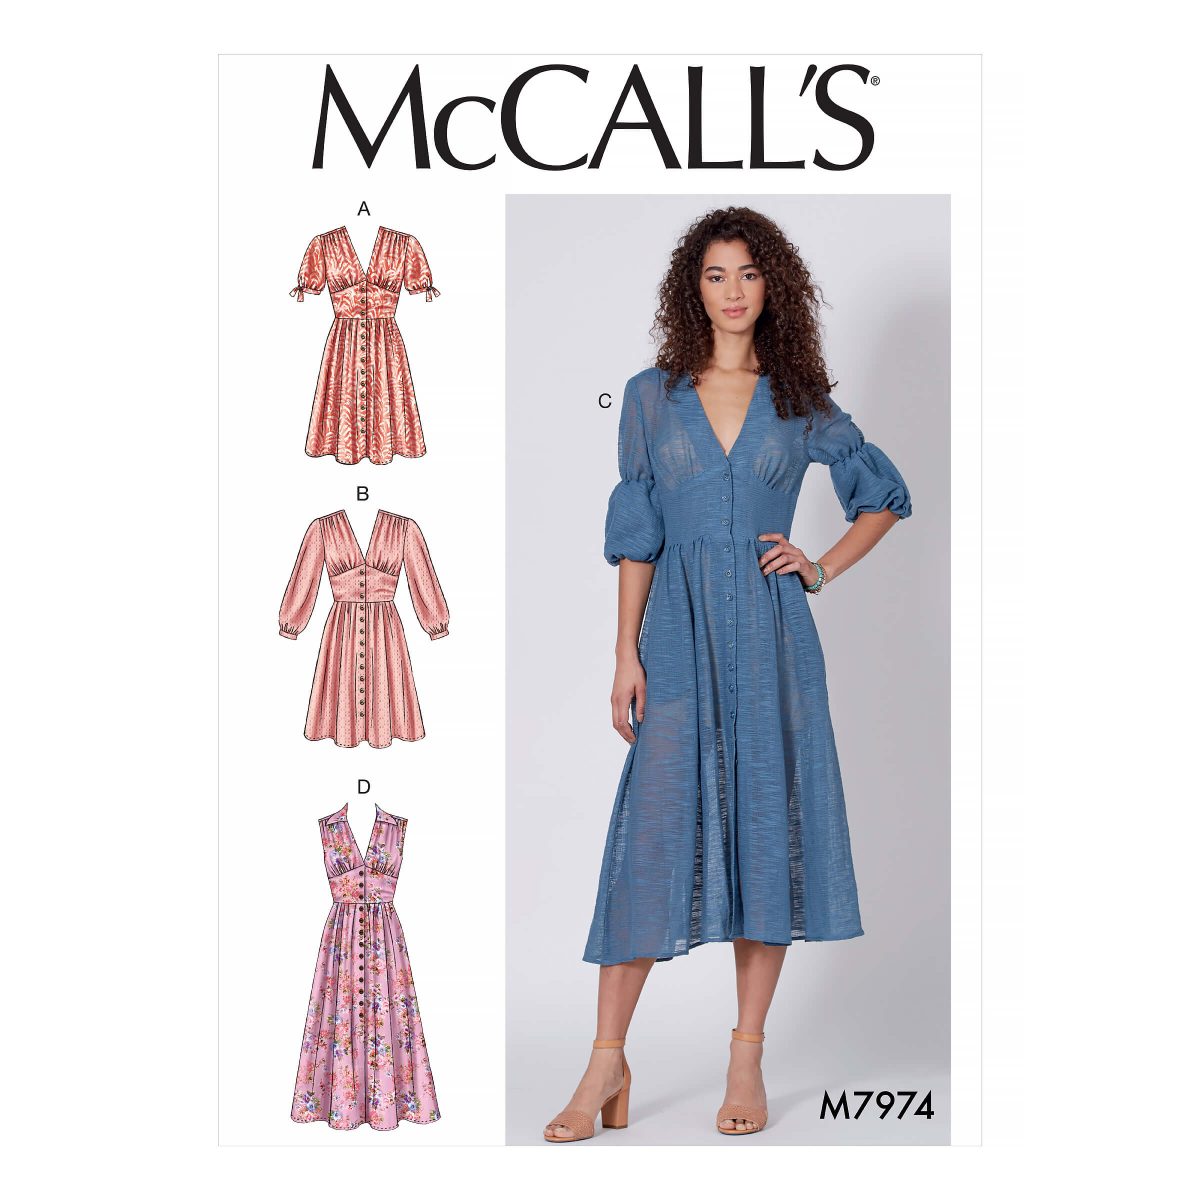 McCall's Sewing Pattern M7974 Misses' Dresses